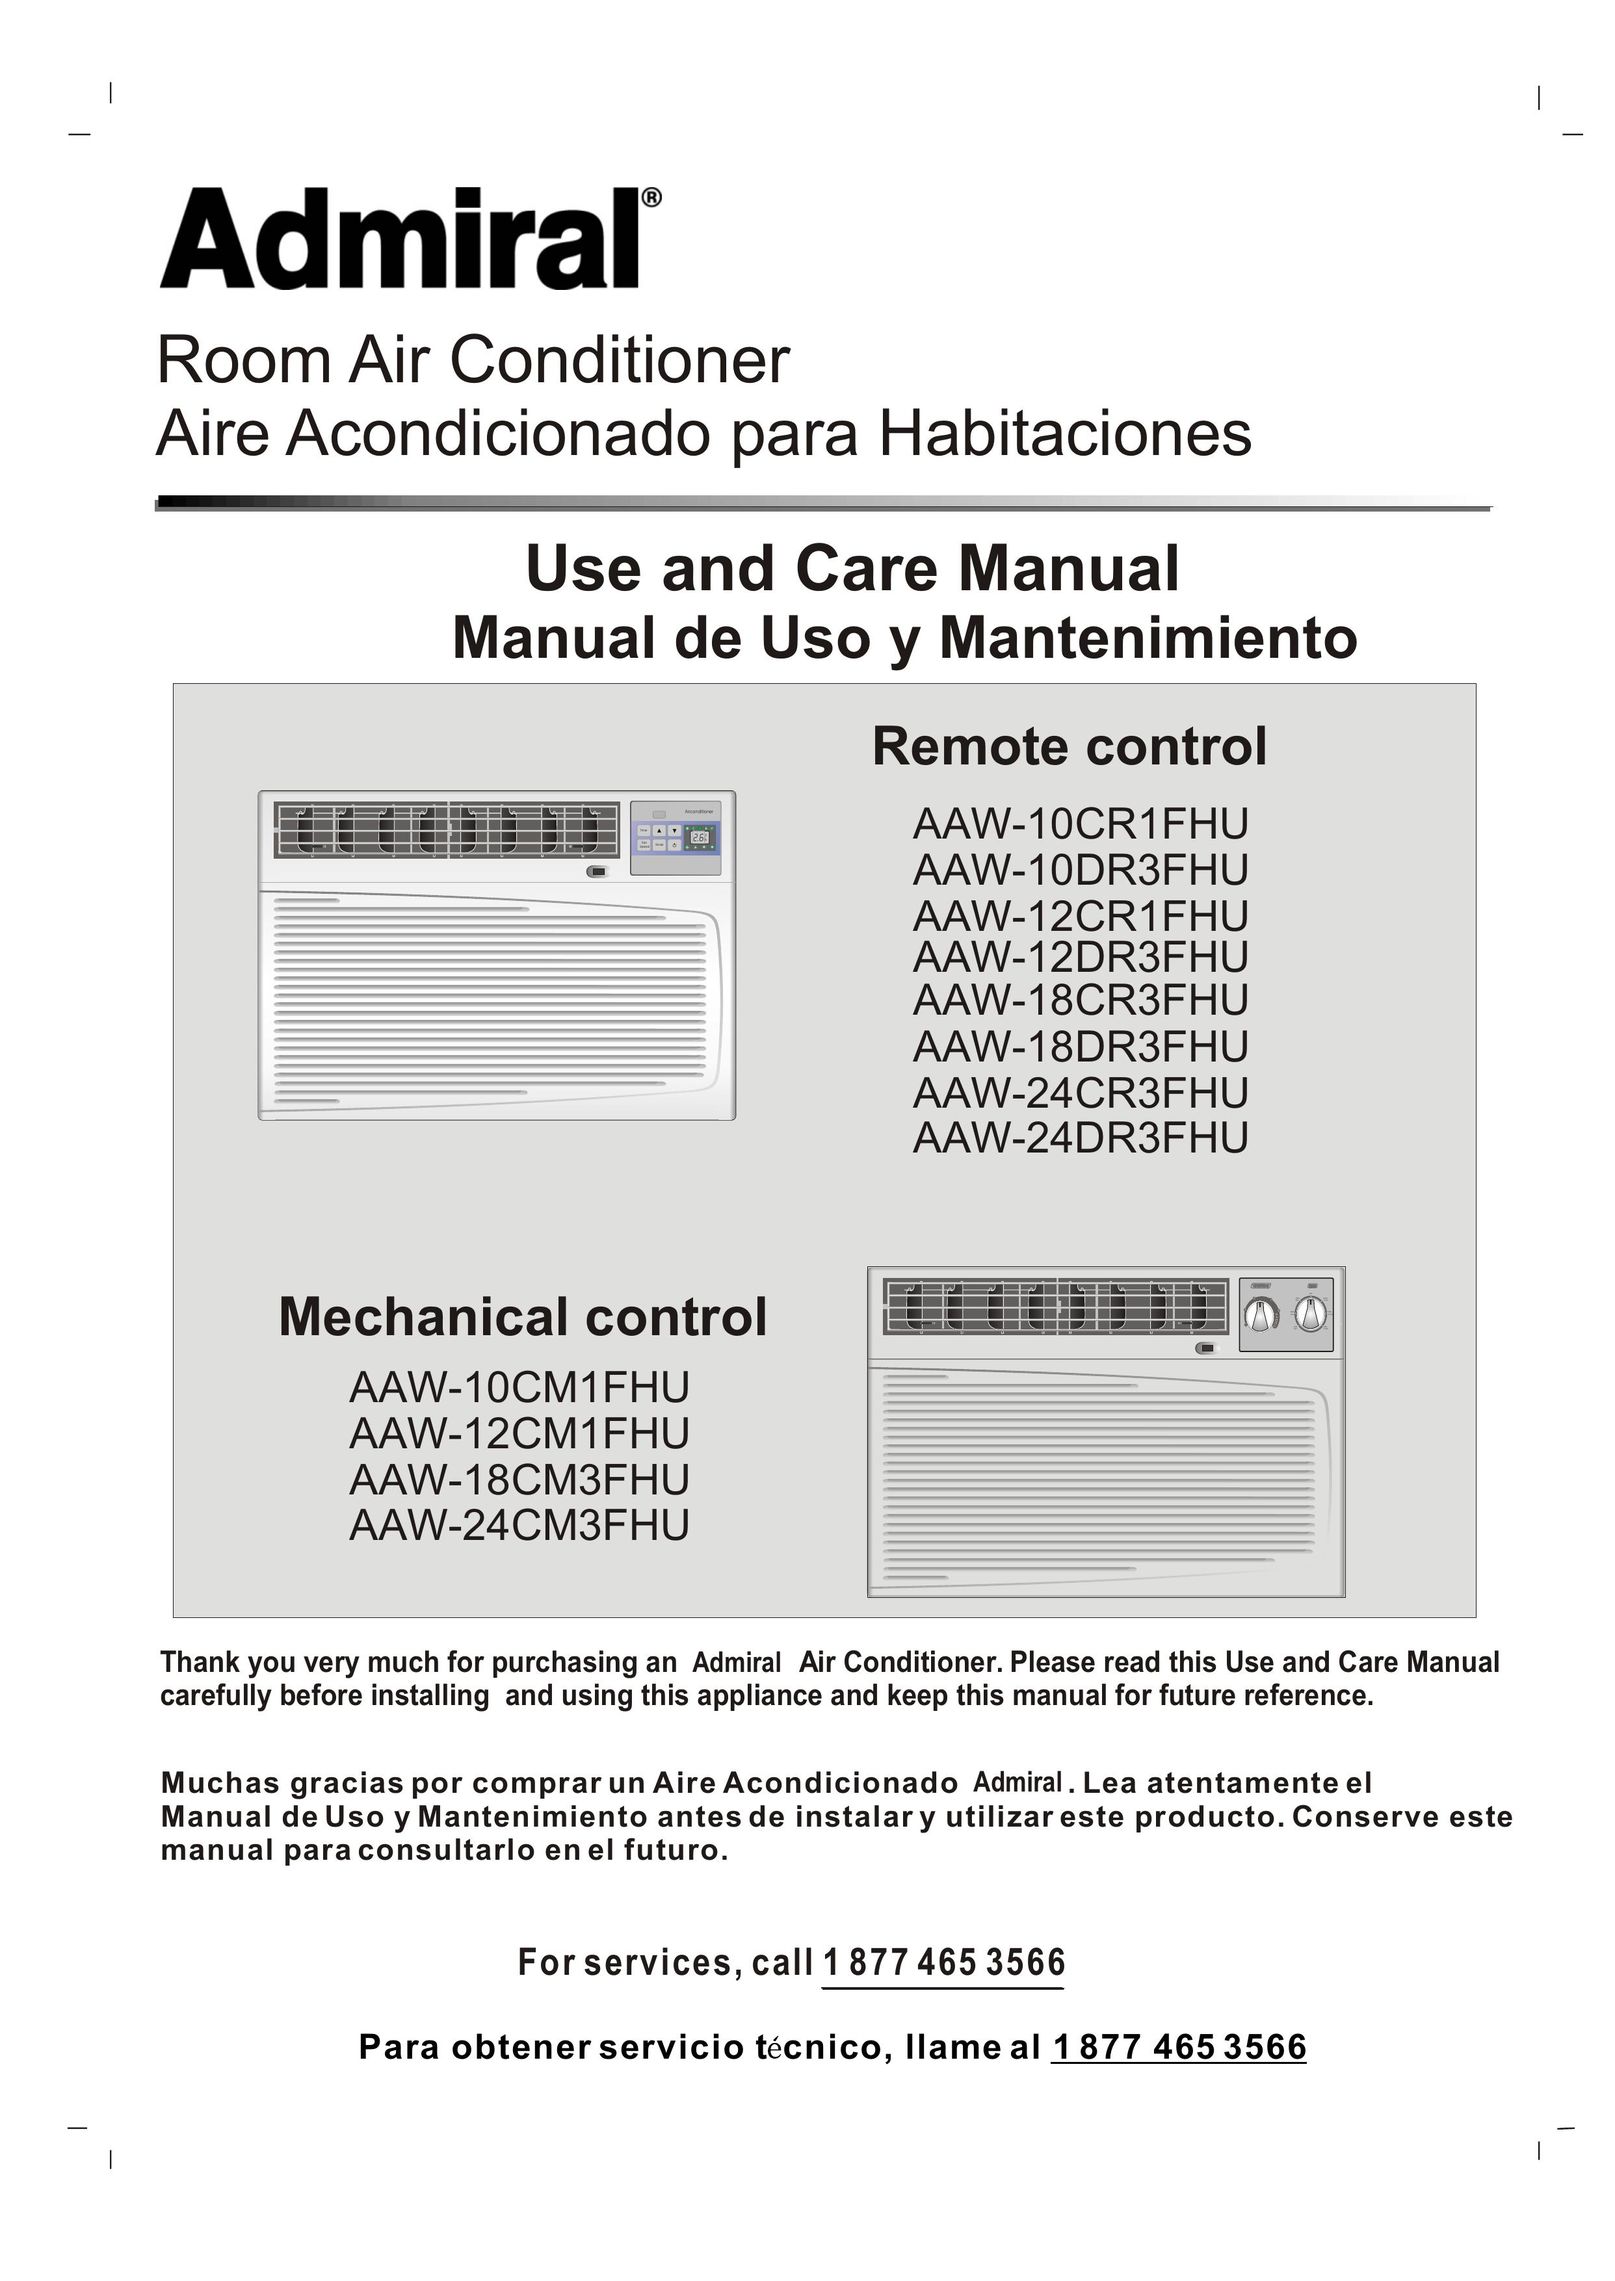 Admiral AAW-18CR3FHU Air Conditioner User Manual